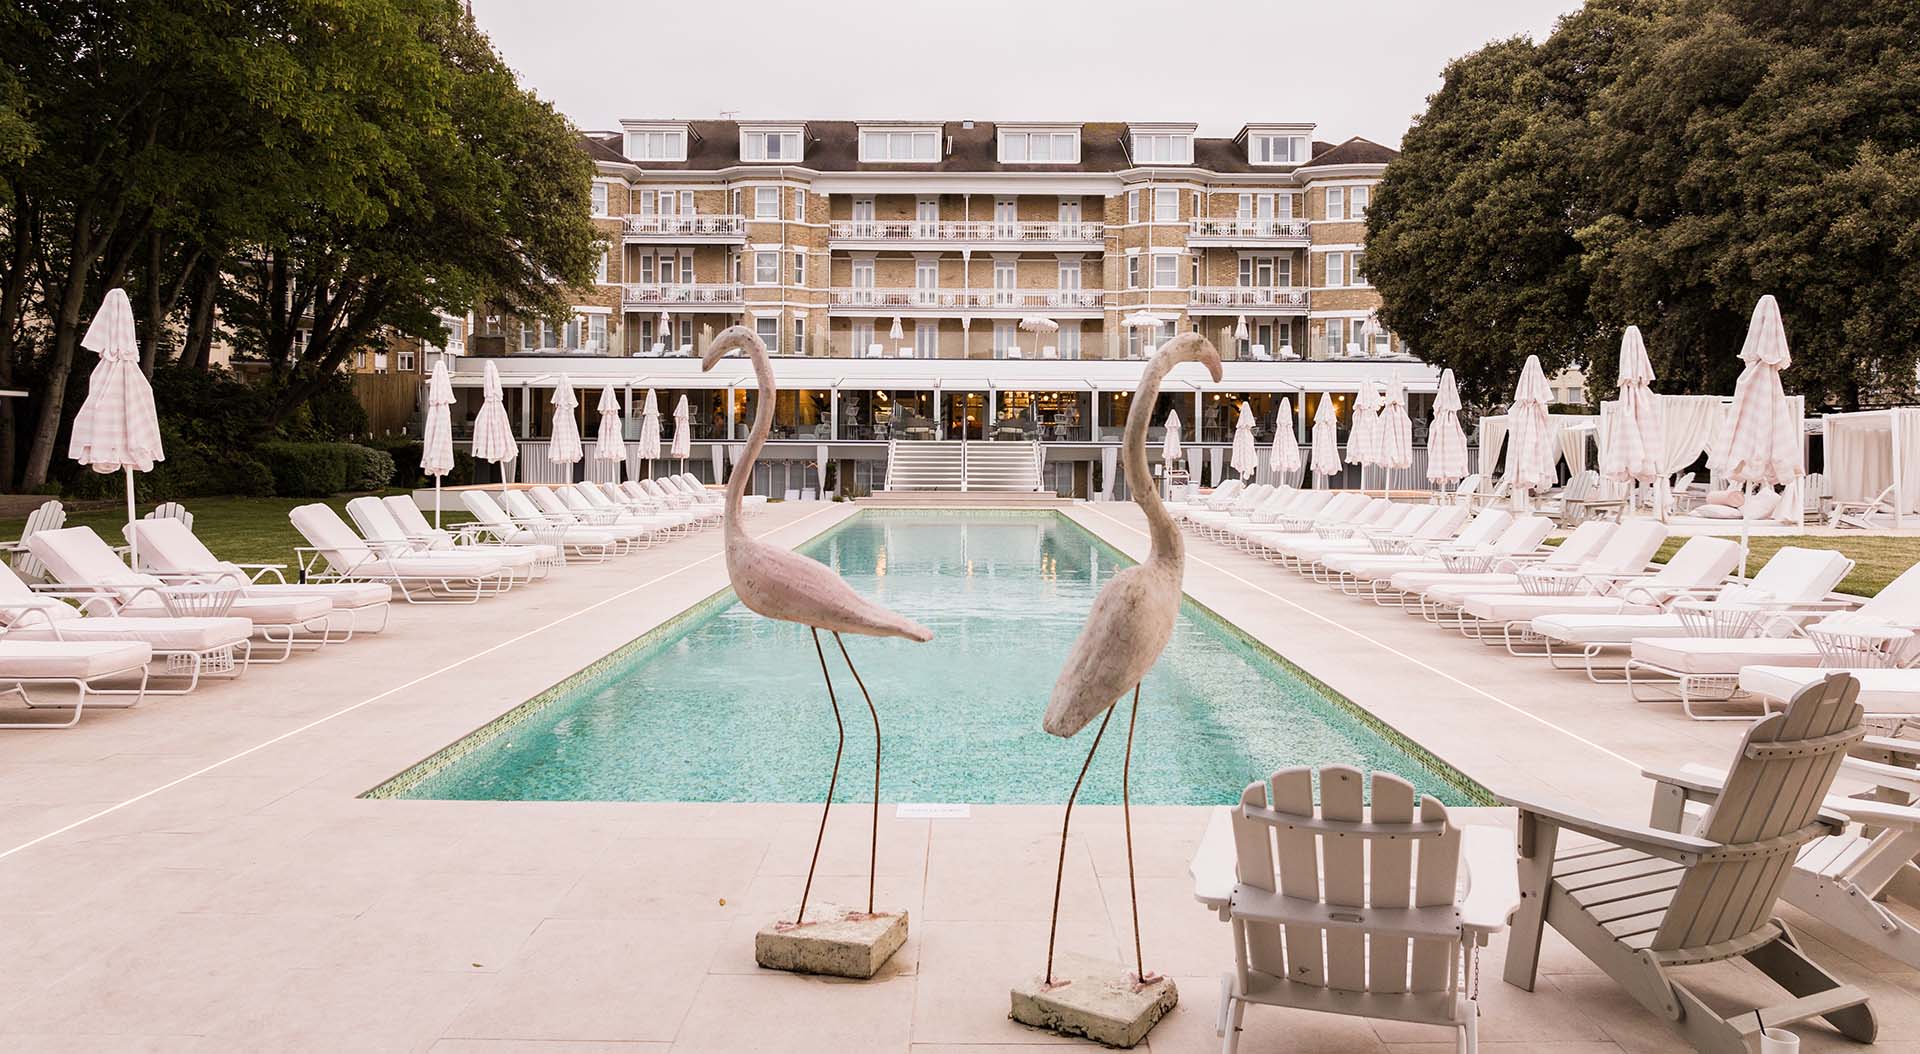 The Nici Hotel, outdoor pool with sun loungers and flamingo sculptures